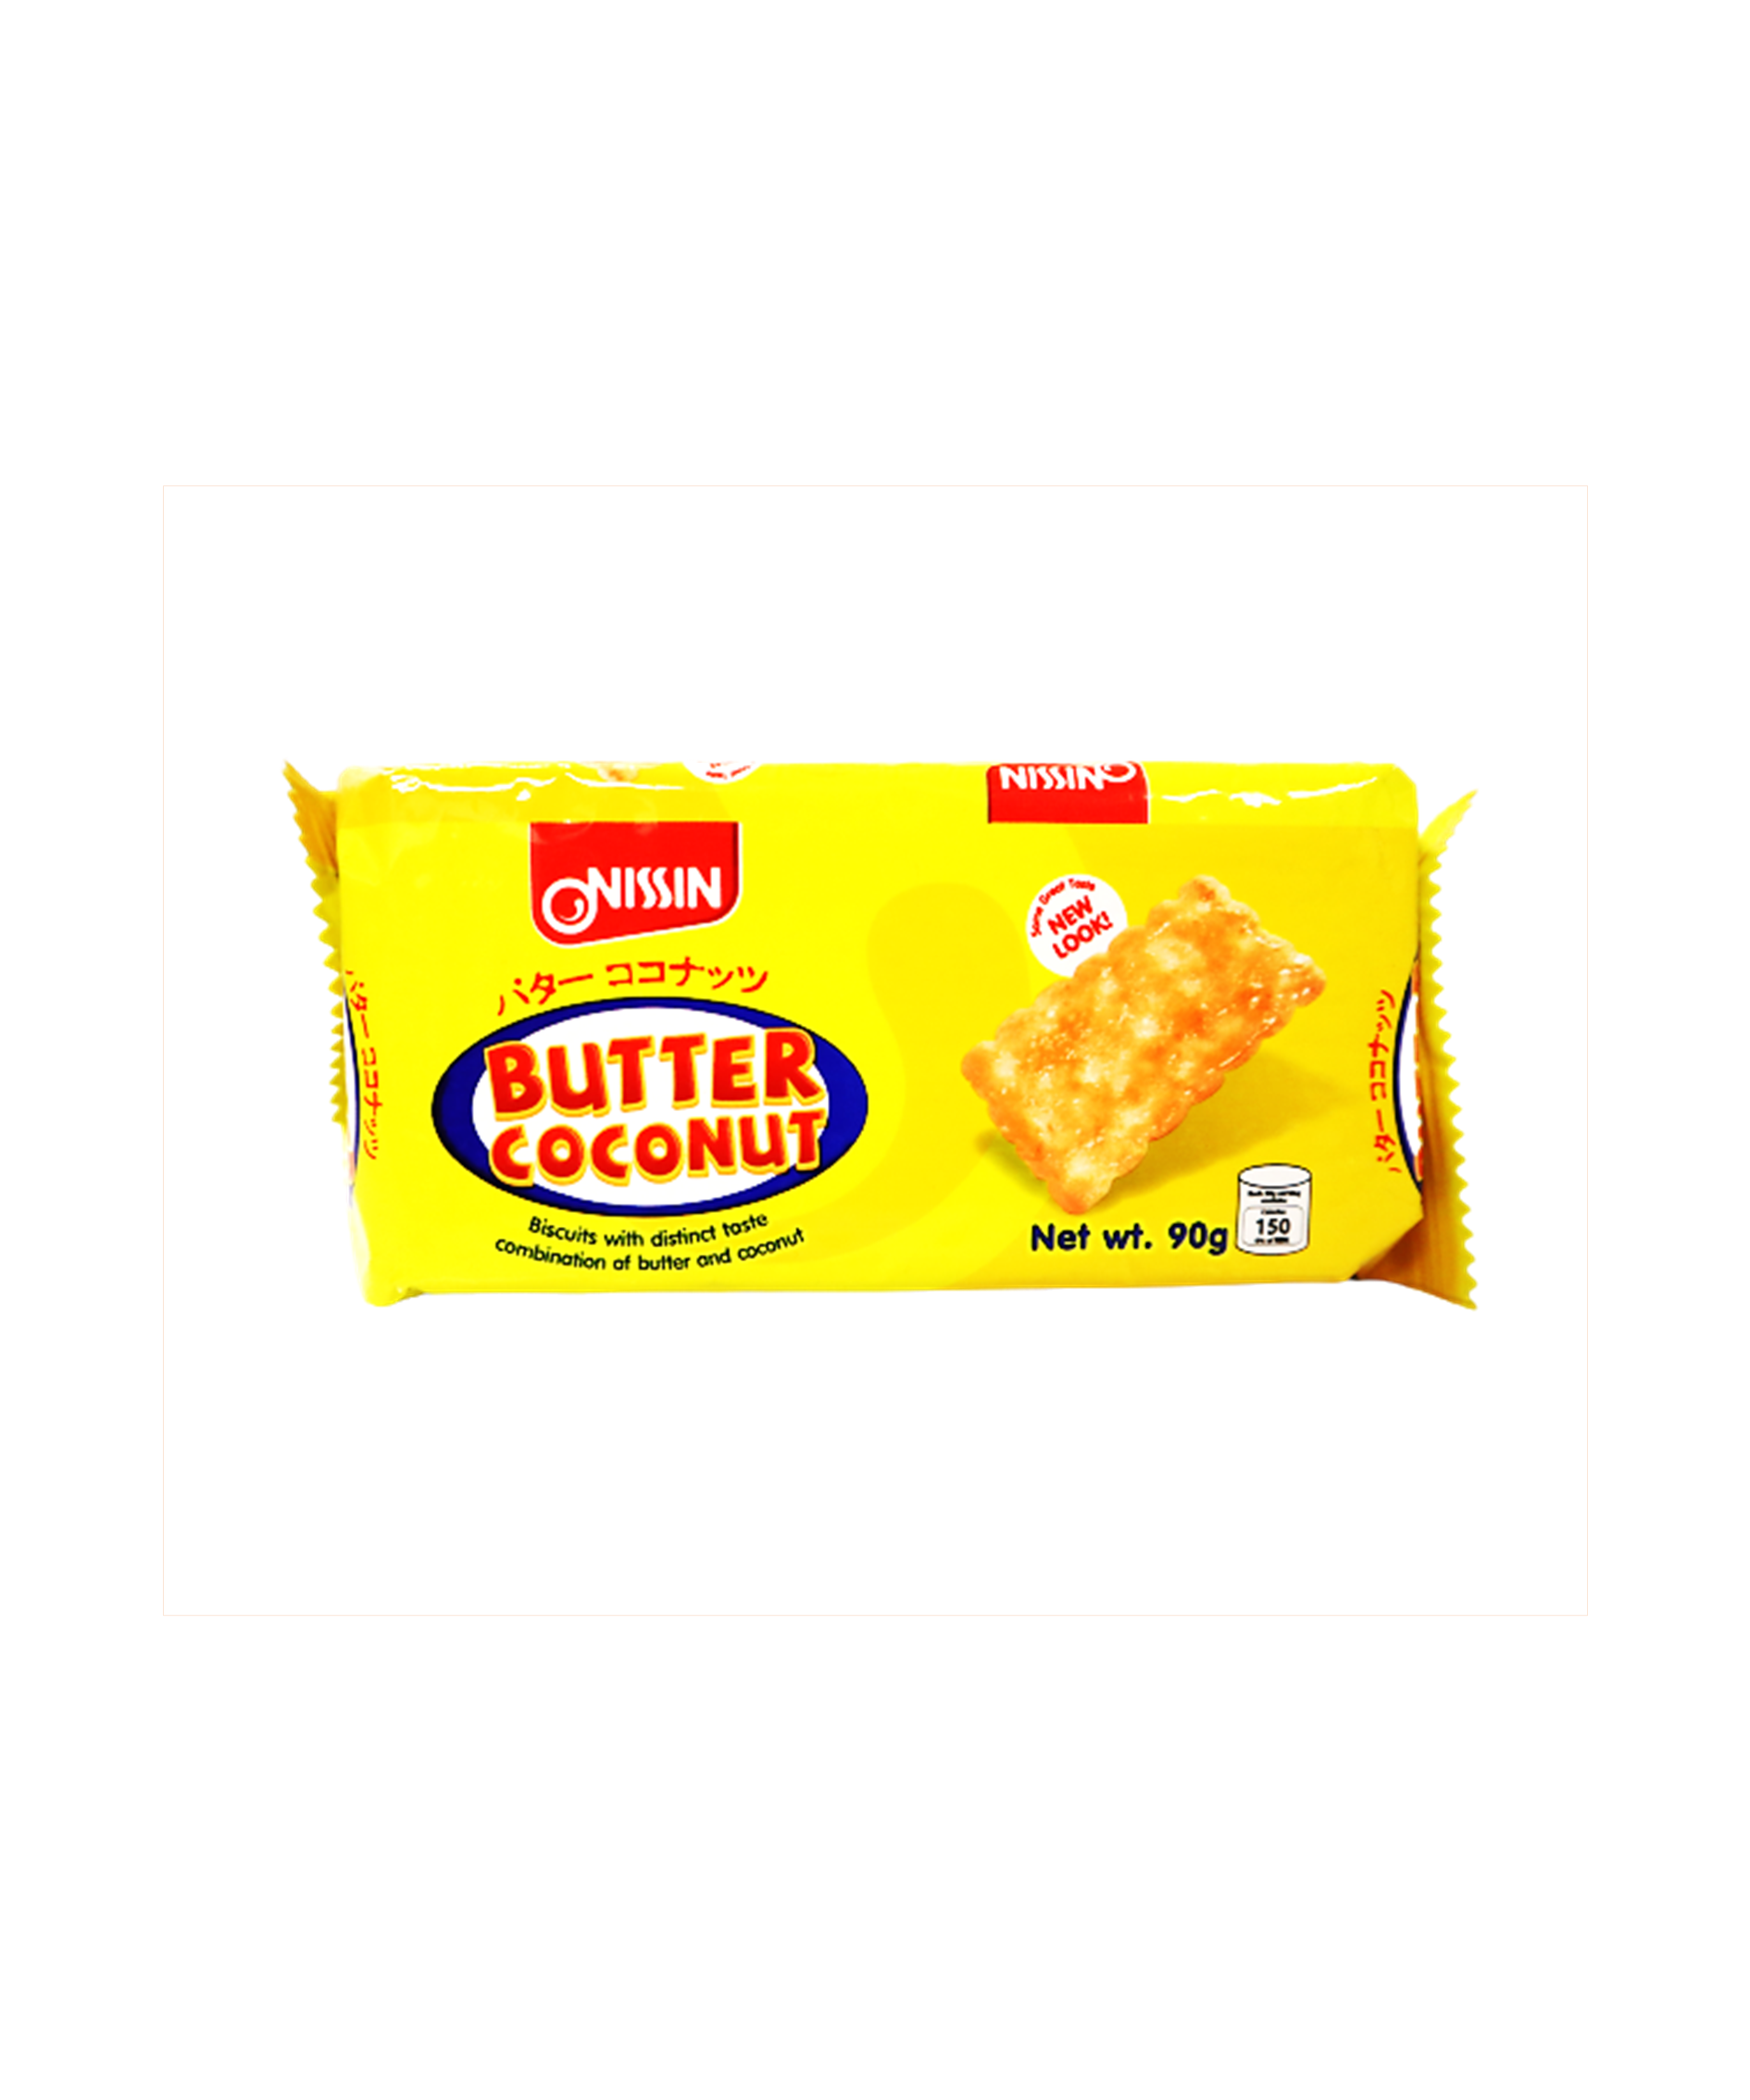 Nissin Butter Coconut Biscuit 168g